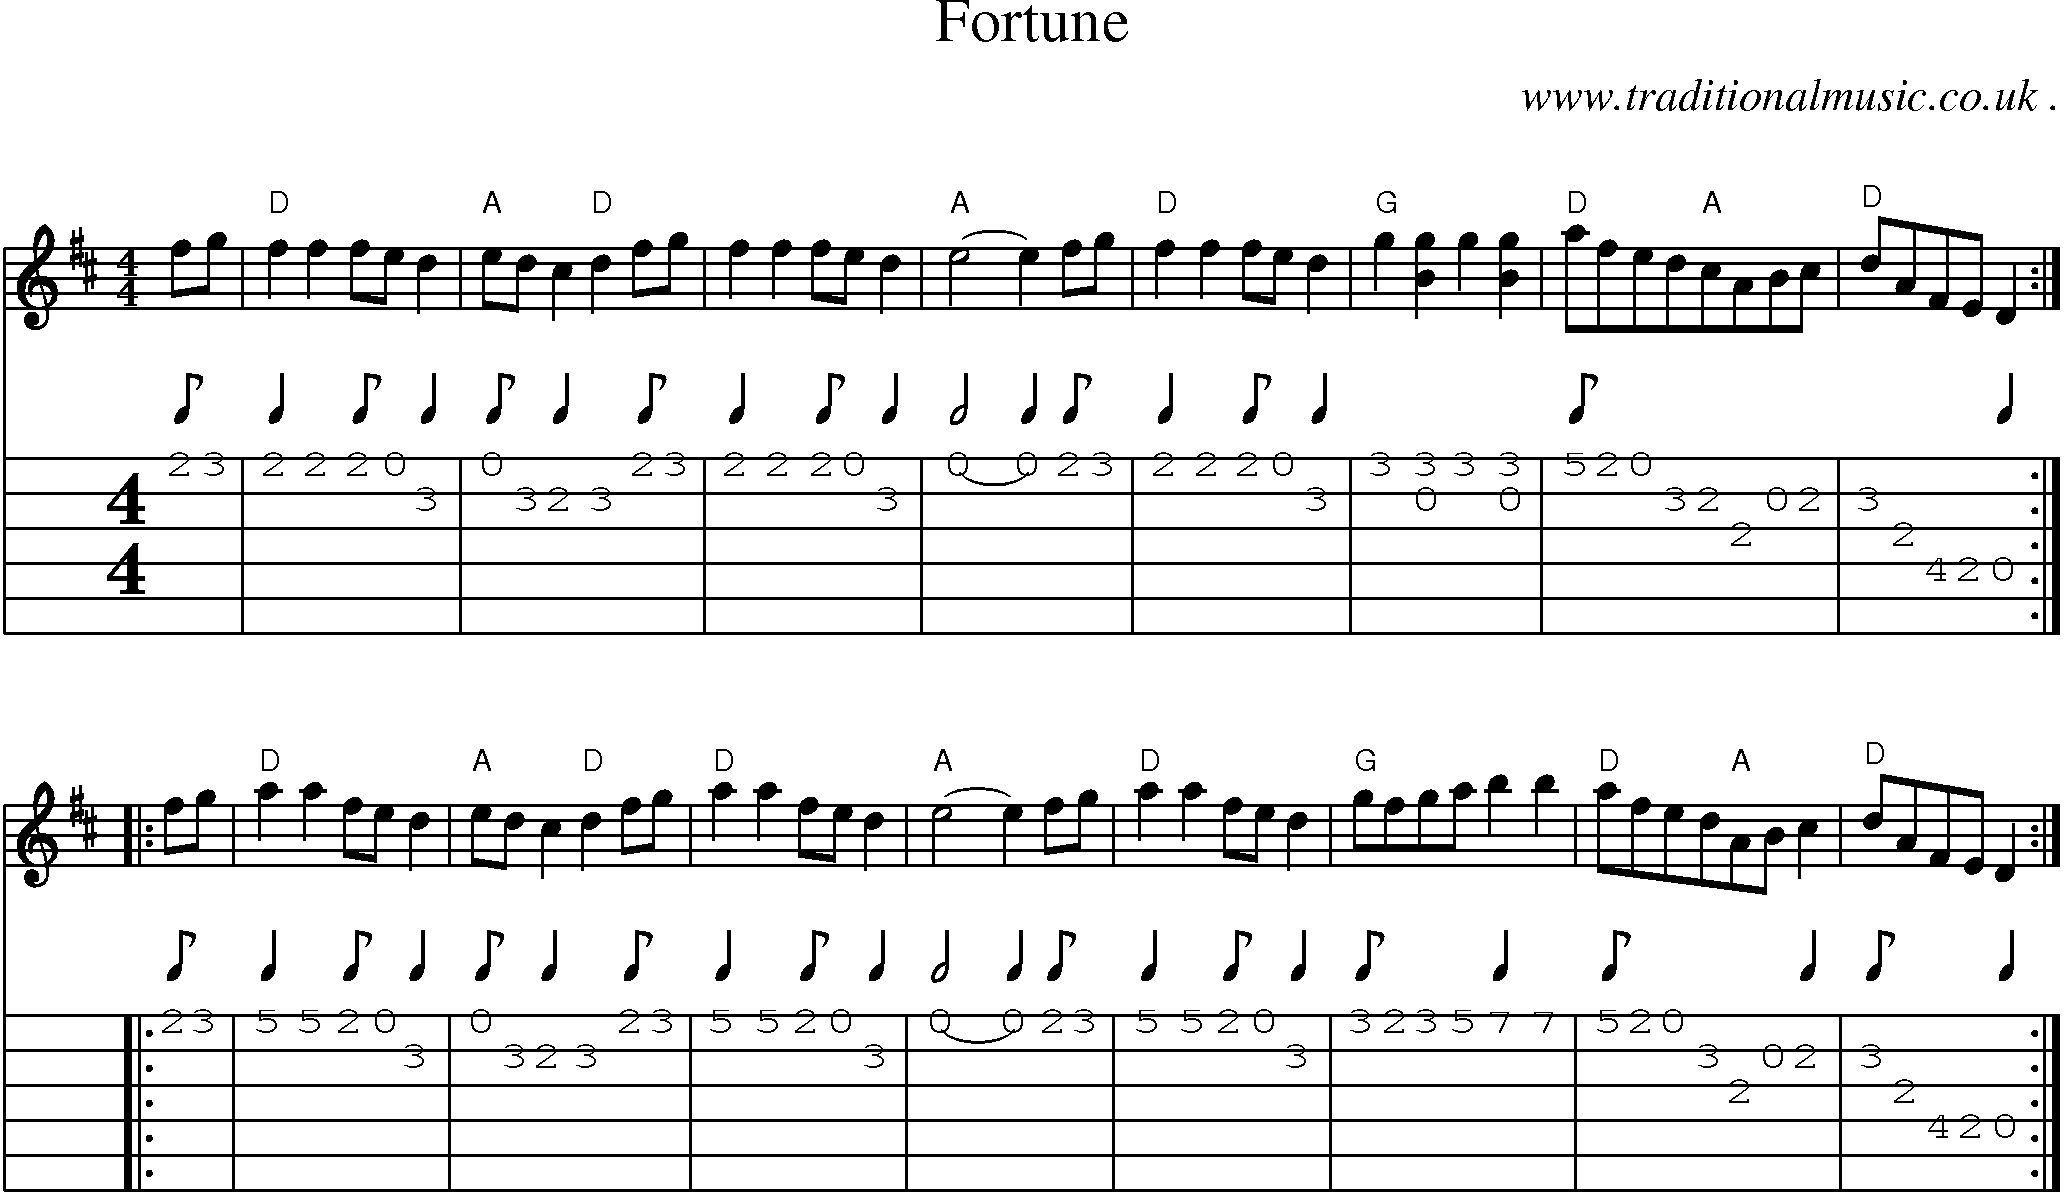 Music Score and Guitar Tabs for Fortune